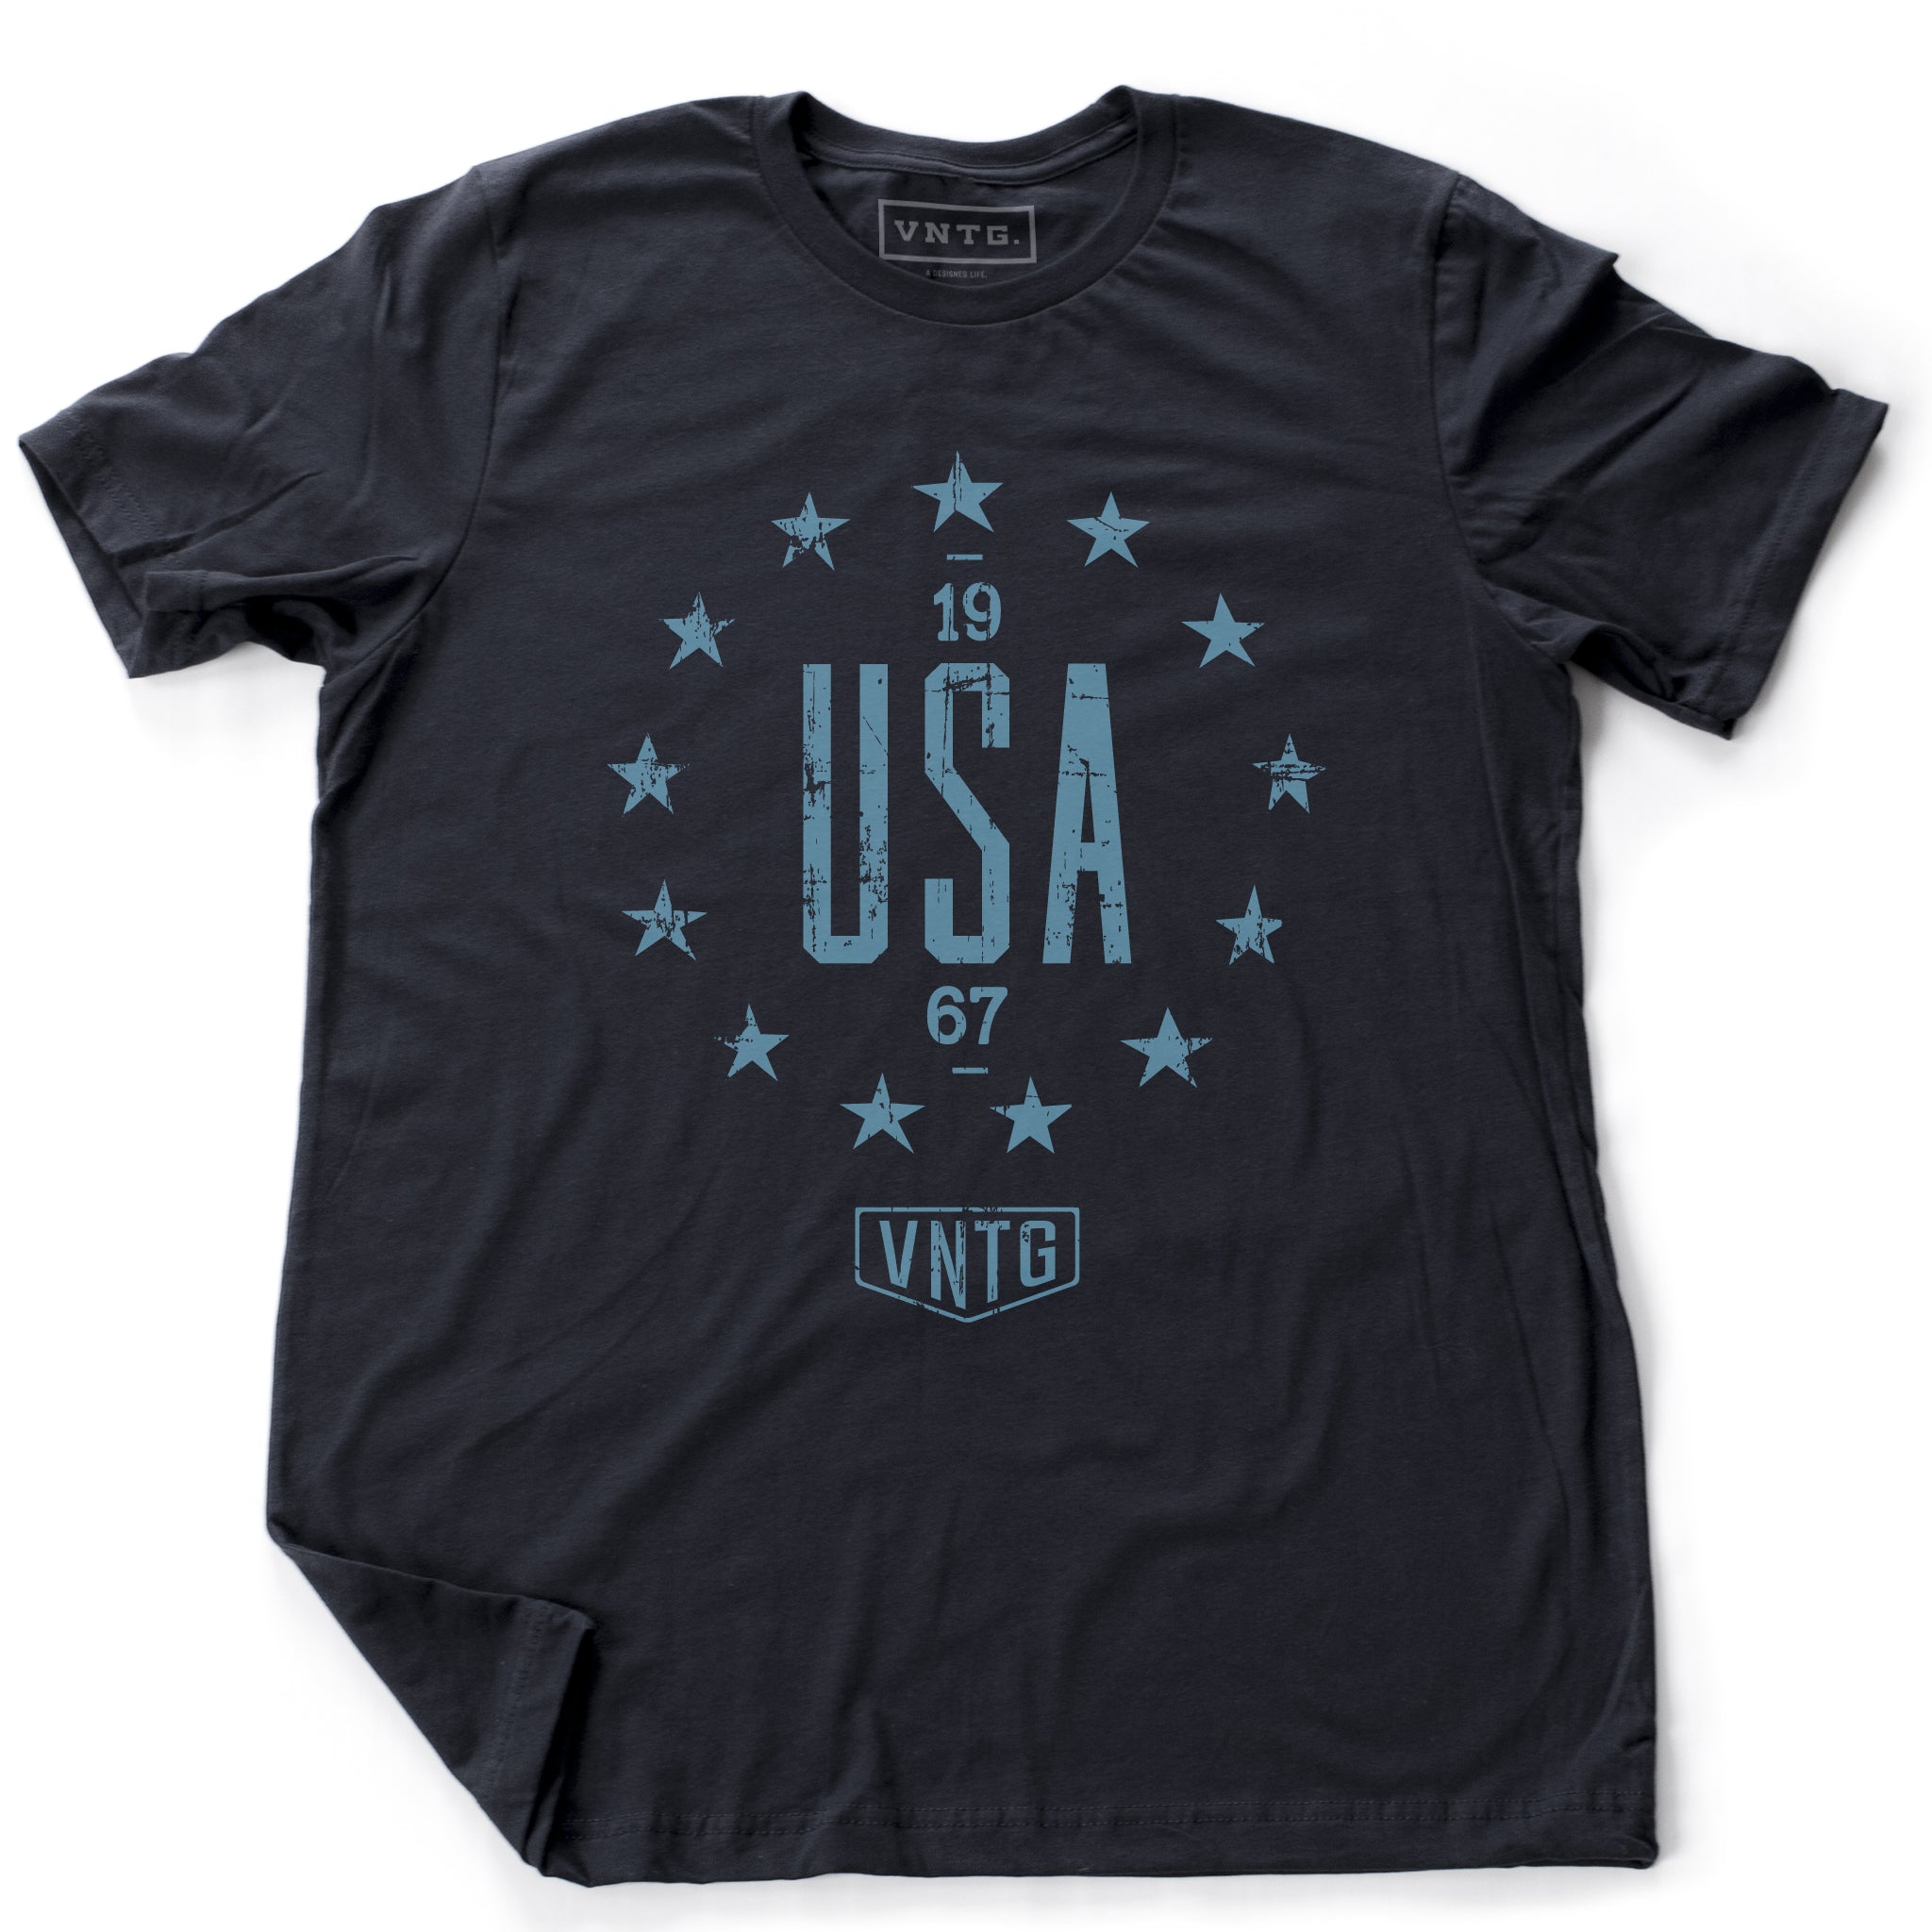 A vintage inspired, classic, retro design, graphic t-shirt with “USA” in large letters, surrounded by 13 stars of the original American colonies, and the VNTG. logo beneath. From wolfsaint.net